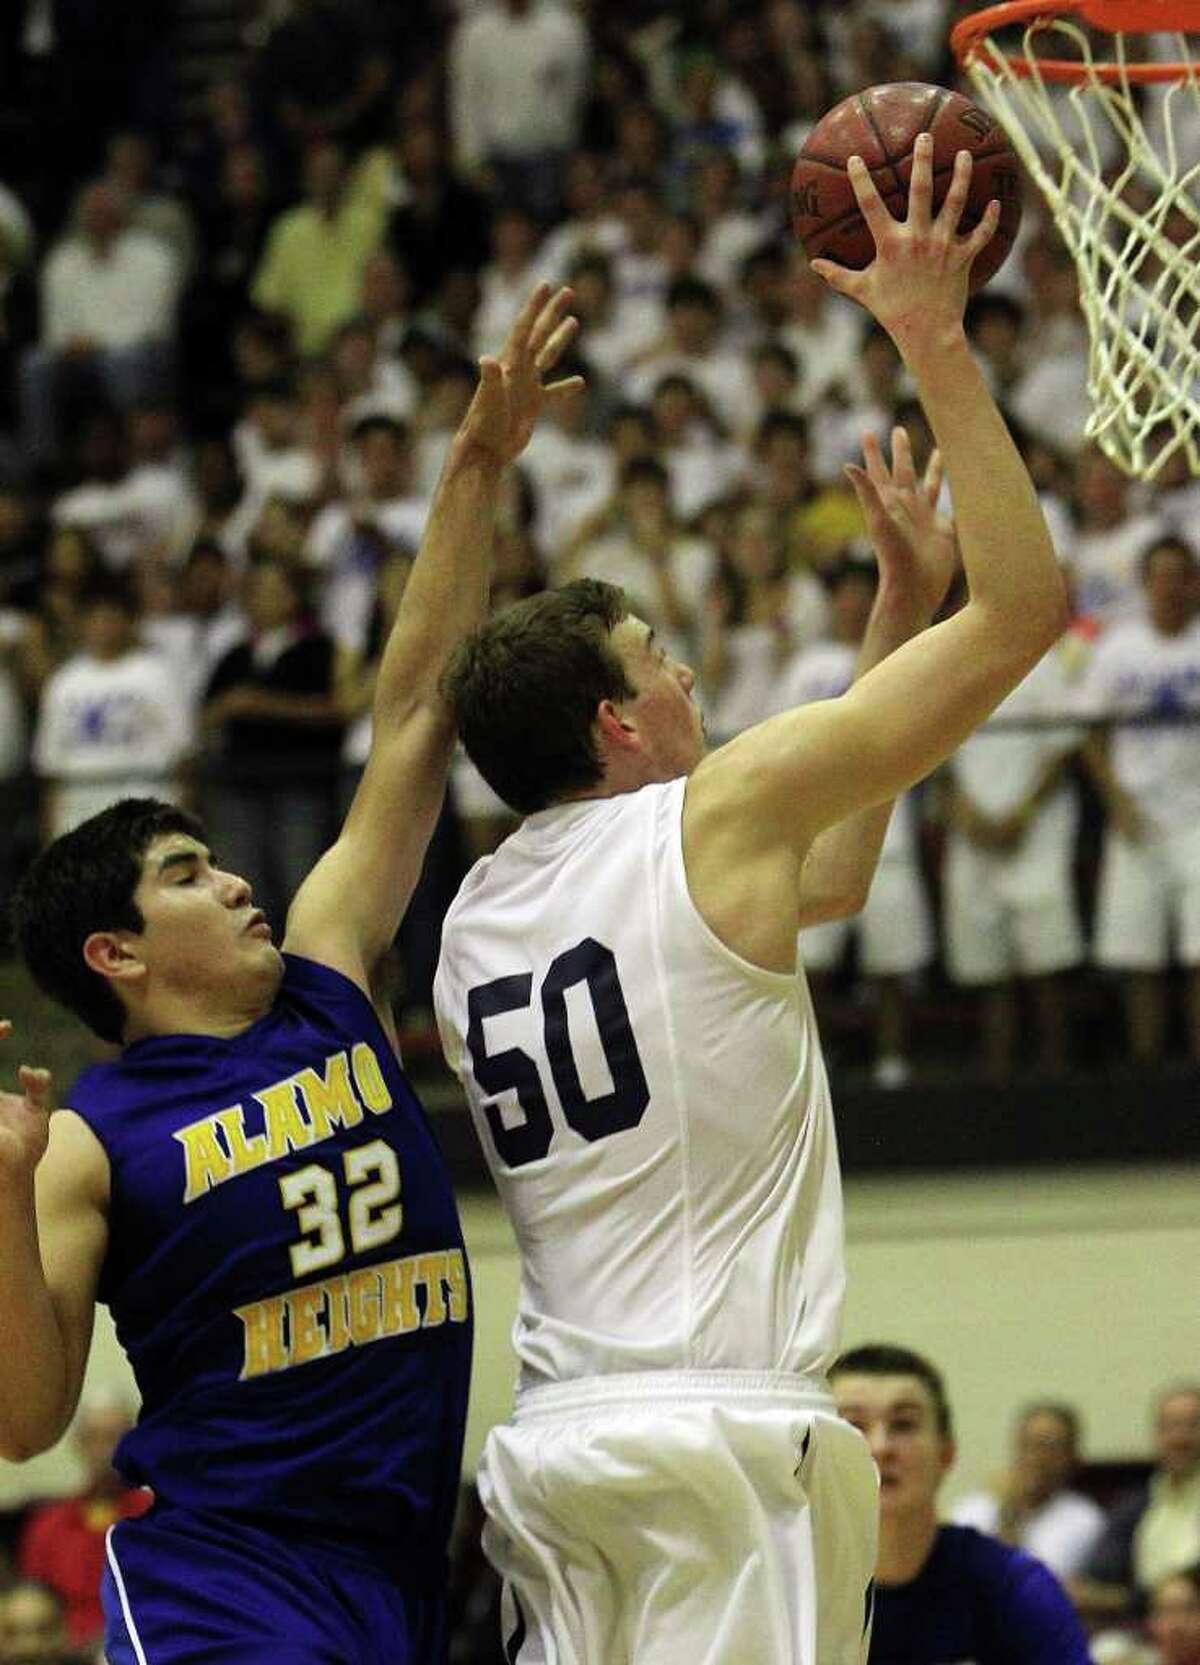 Alamo Heights' Brandon Garcia (32) attempts to defend against Boerne Champion's Dallas Quick (50) in the second half in Class 4A basketball playoffs at Littleton Gym on Wednesday, Mar. 2, 1011. Quick was fouled and the shot and helped Boerne Champion defeat Alamo Heights, 53-47. Kin Man Hui/kmhui@express-news.net